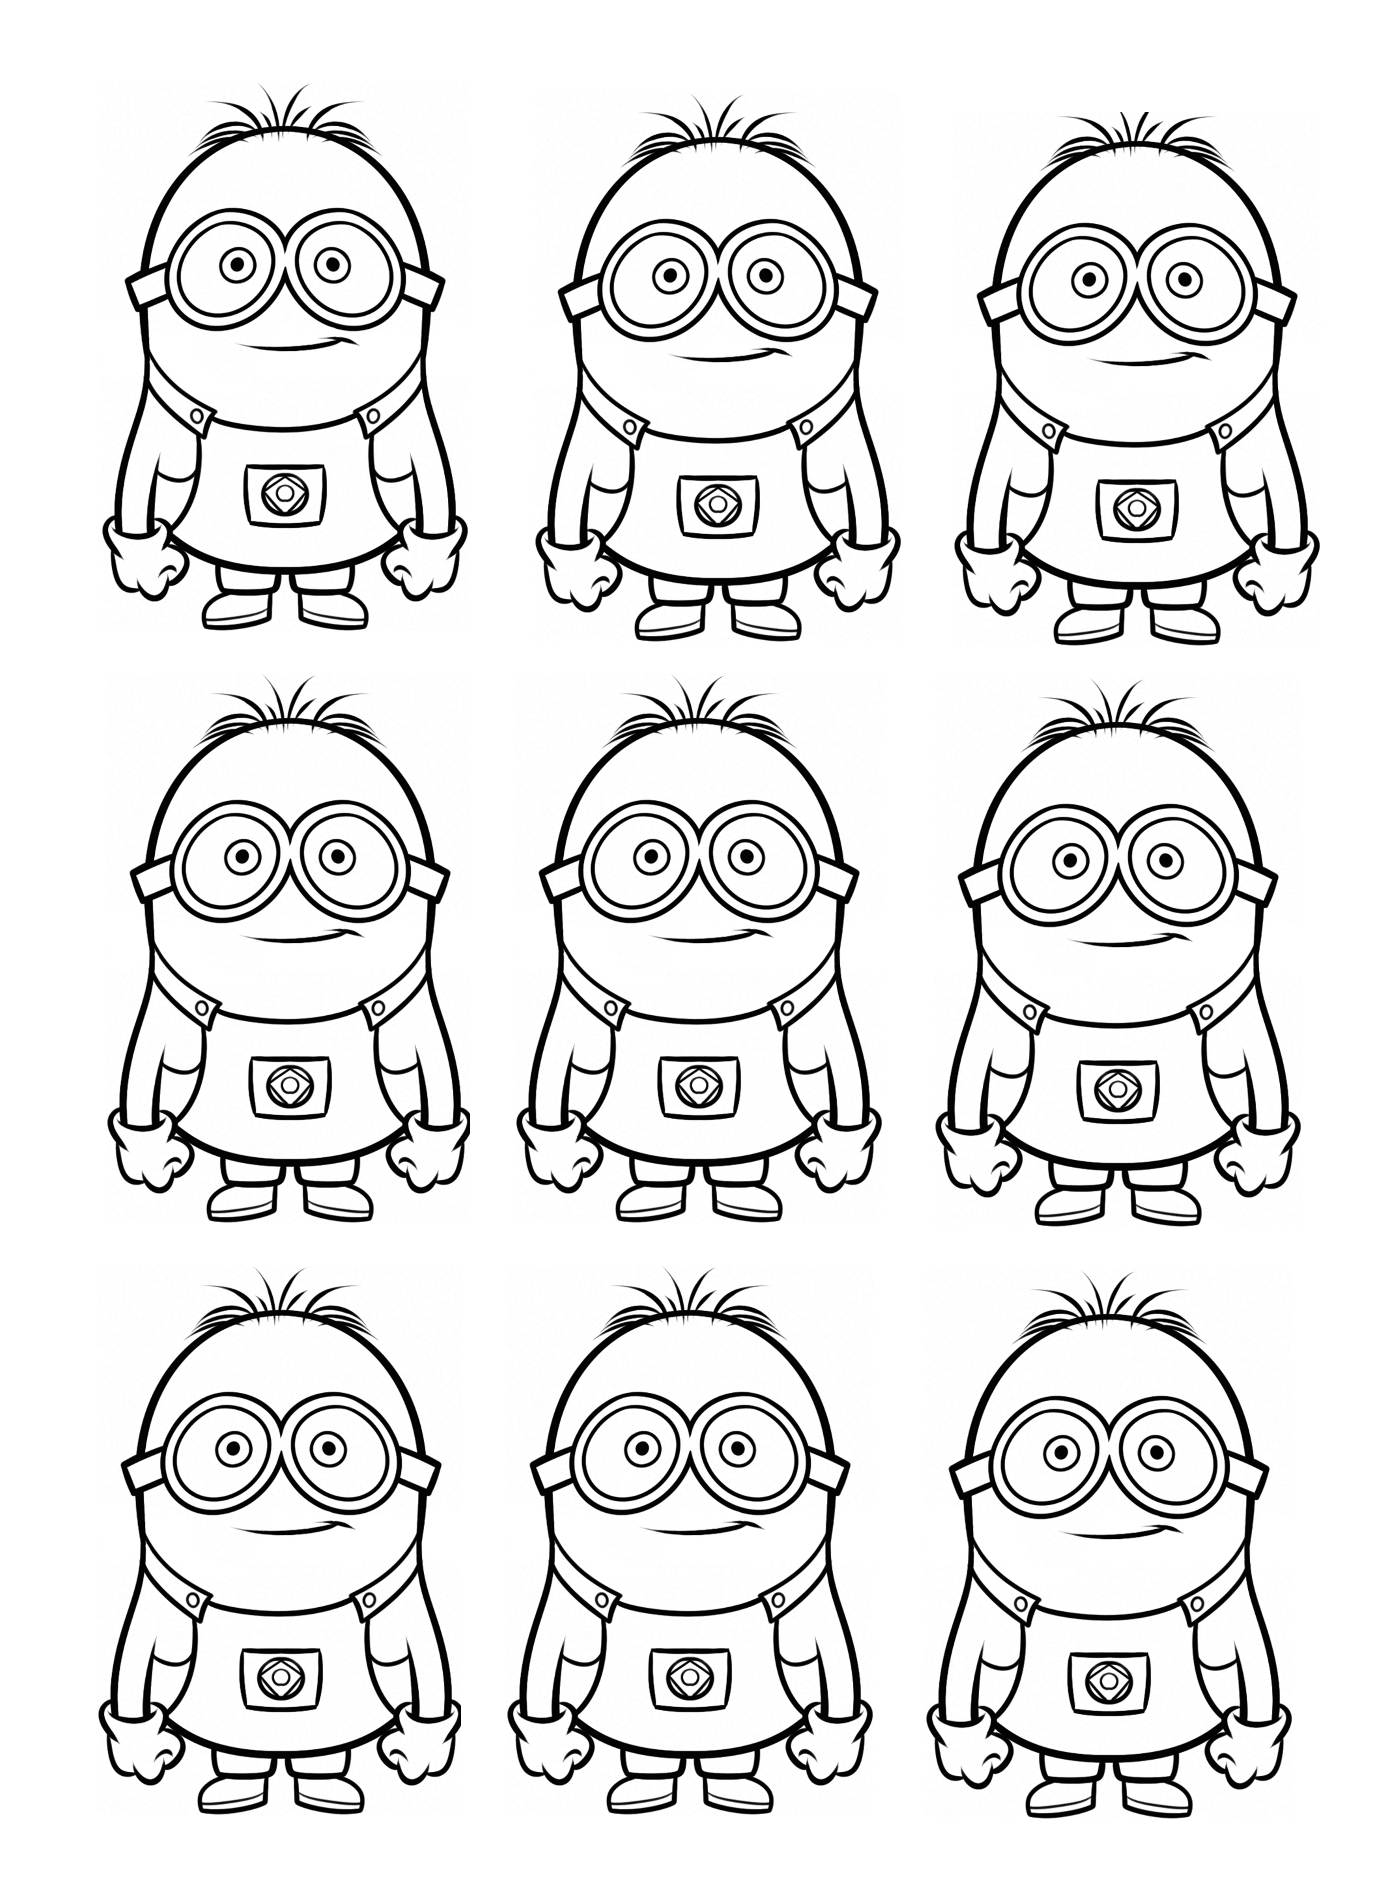 Very simple Minions coloring pages